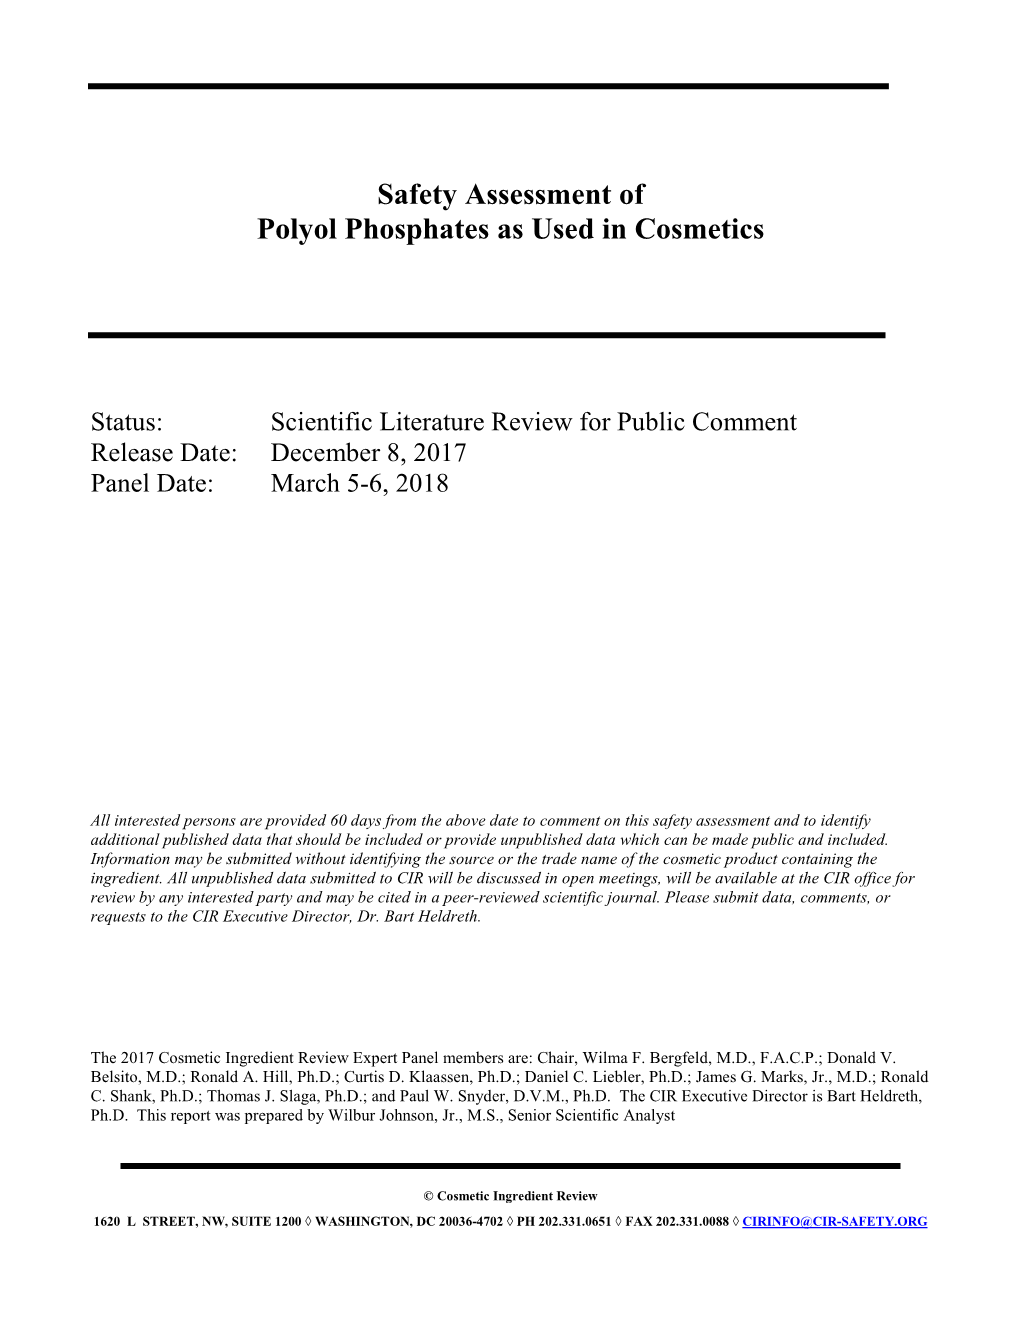 Safety Assessment of Polyol Phosphates As Used in Cosmetics